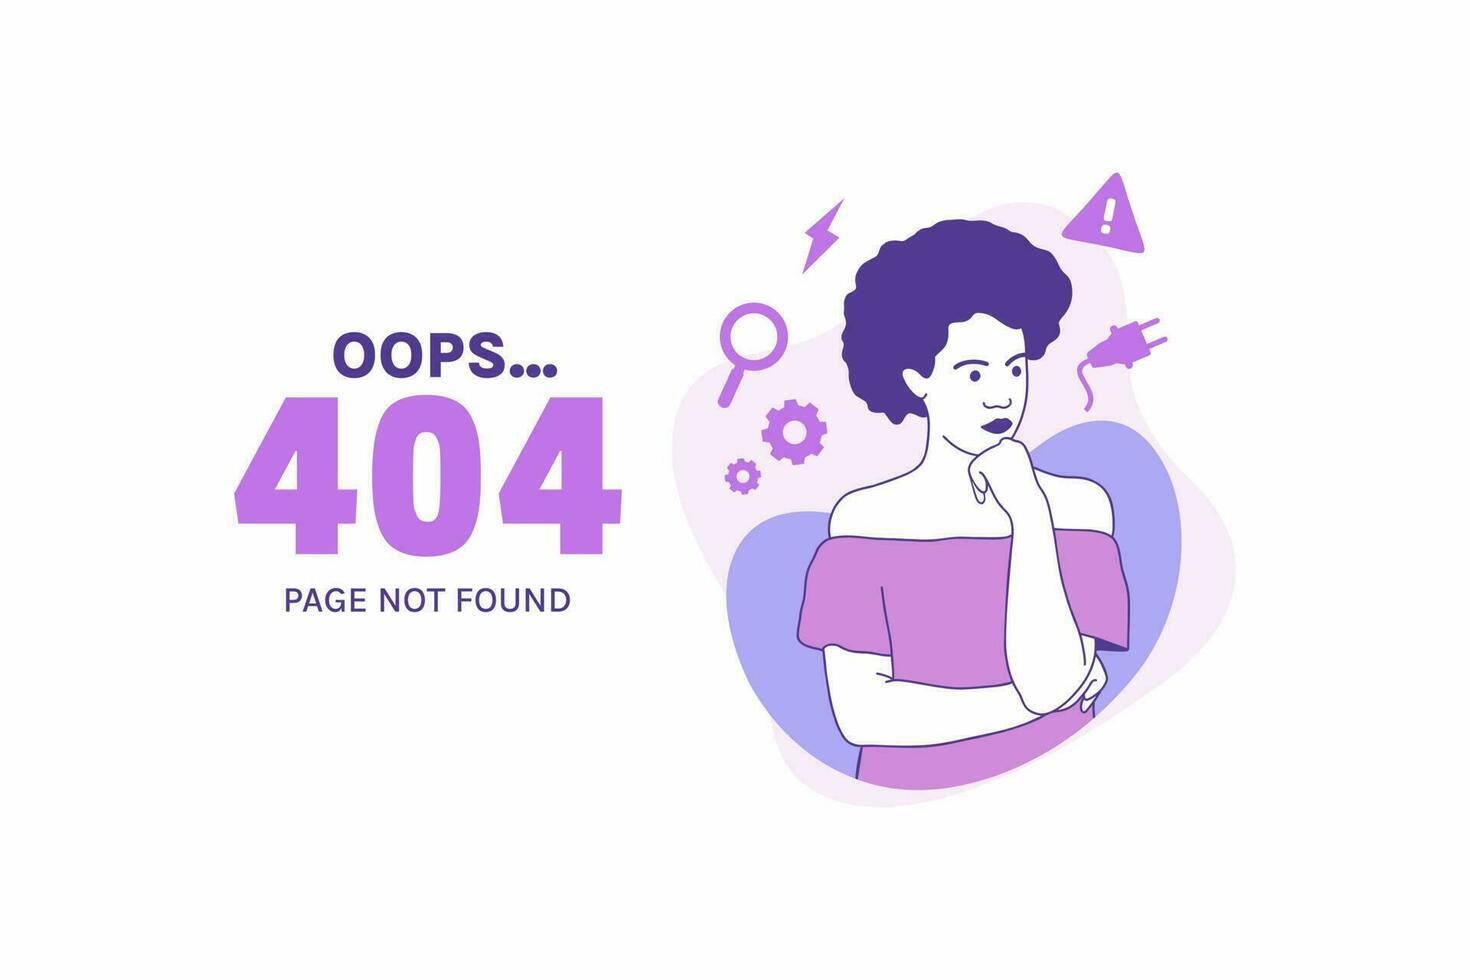 Illustrations Arms Crossed angry woman for Oops 404 error design concept landing page vector